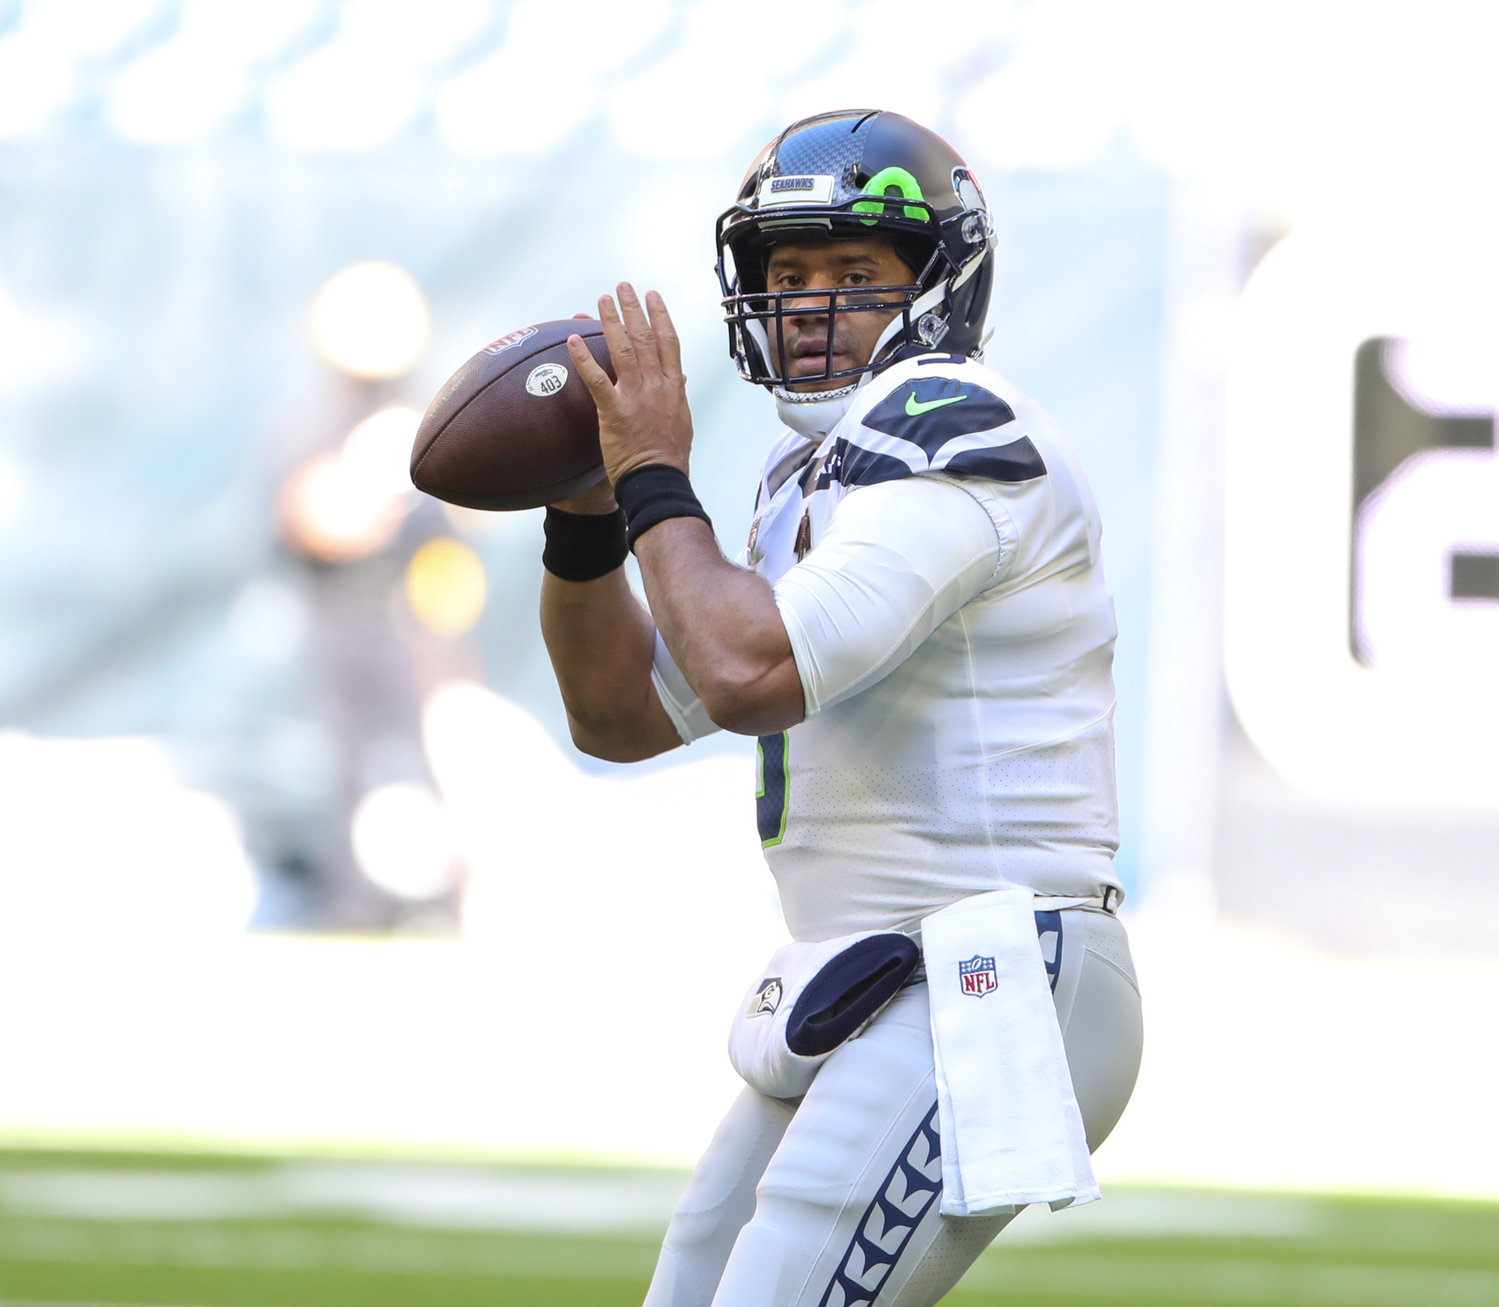 Seattle Seahawks quarterback Russell Wilson (3) warms up before the start of an NFL game between the Seahawks and the Texans on December 12, 2021 in Houston, Texas.